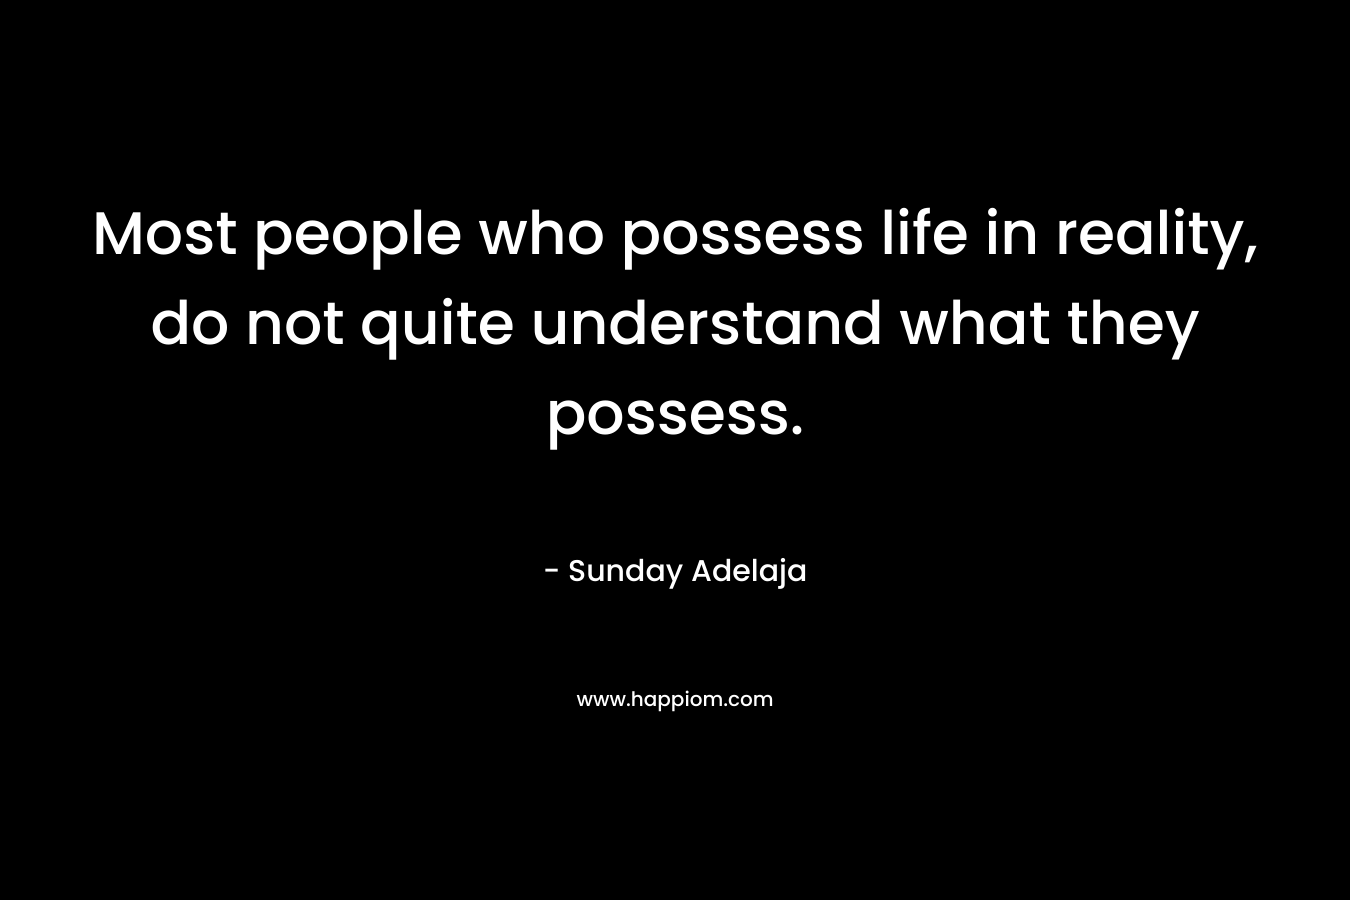 Most people who possess life in reality, do not quite understand what they possess.